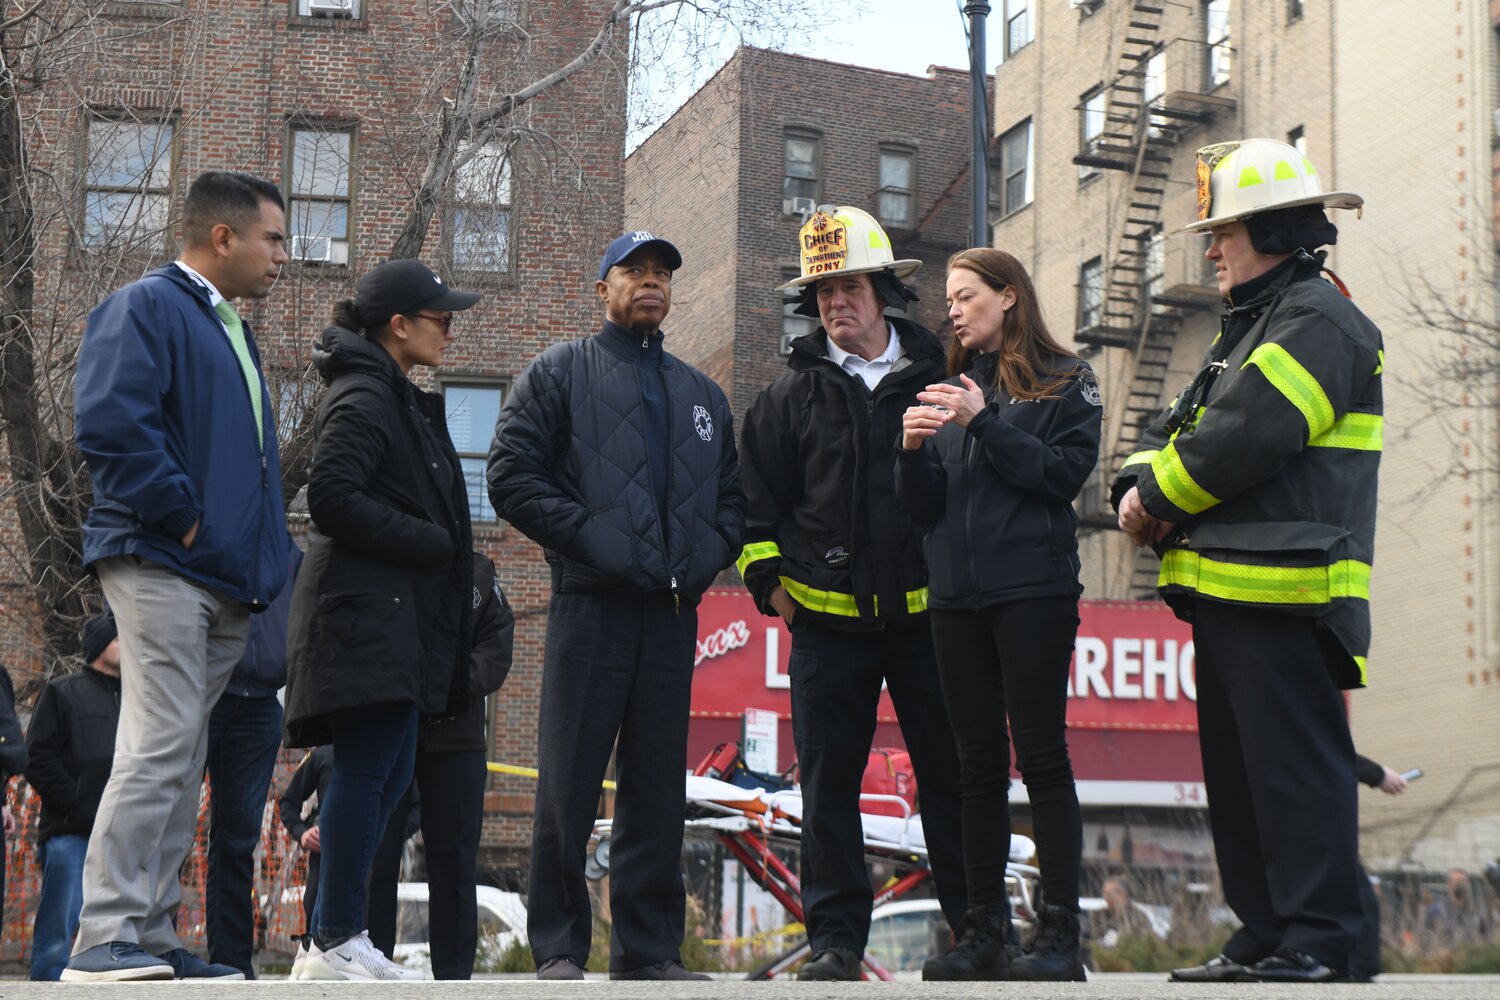 Mayor Eric Adams, FDNY Chief of Department John Hodgens and FDNY commissioner Laura Kavanagh confer following a five-alarm fire in the Bronx caused by a lithium-ion battery attached to a scooter. Firefighters battled the fire for hours and prevented it from spreading to nearby businesses after a battery exploded. Seven people, including five firefighters, were injured